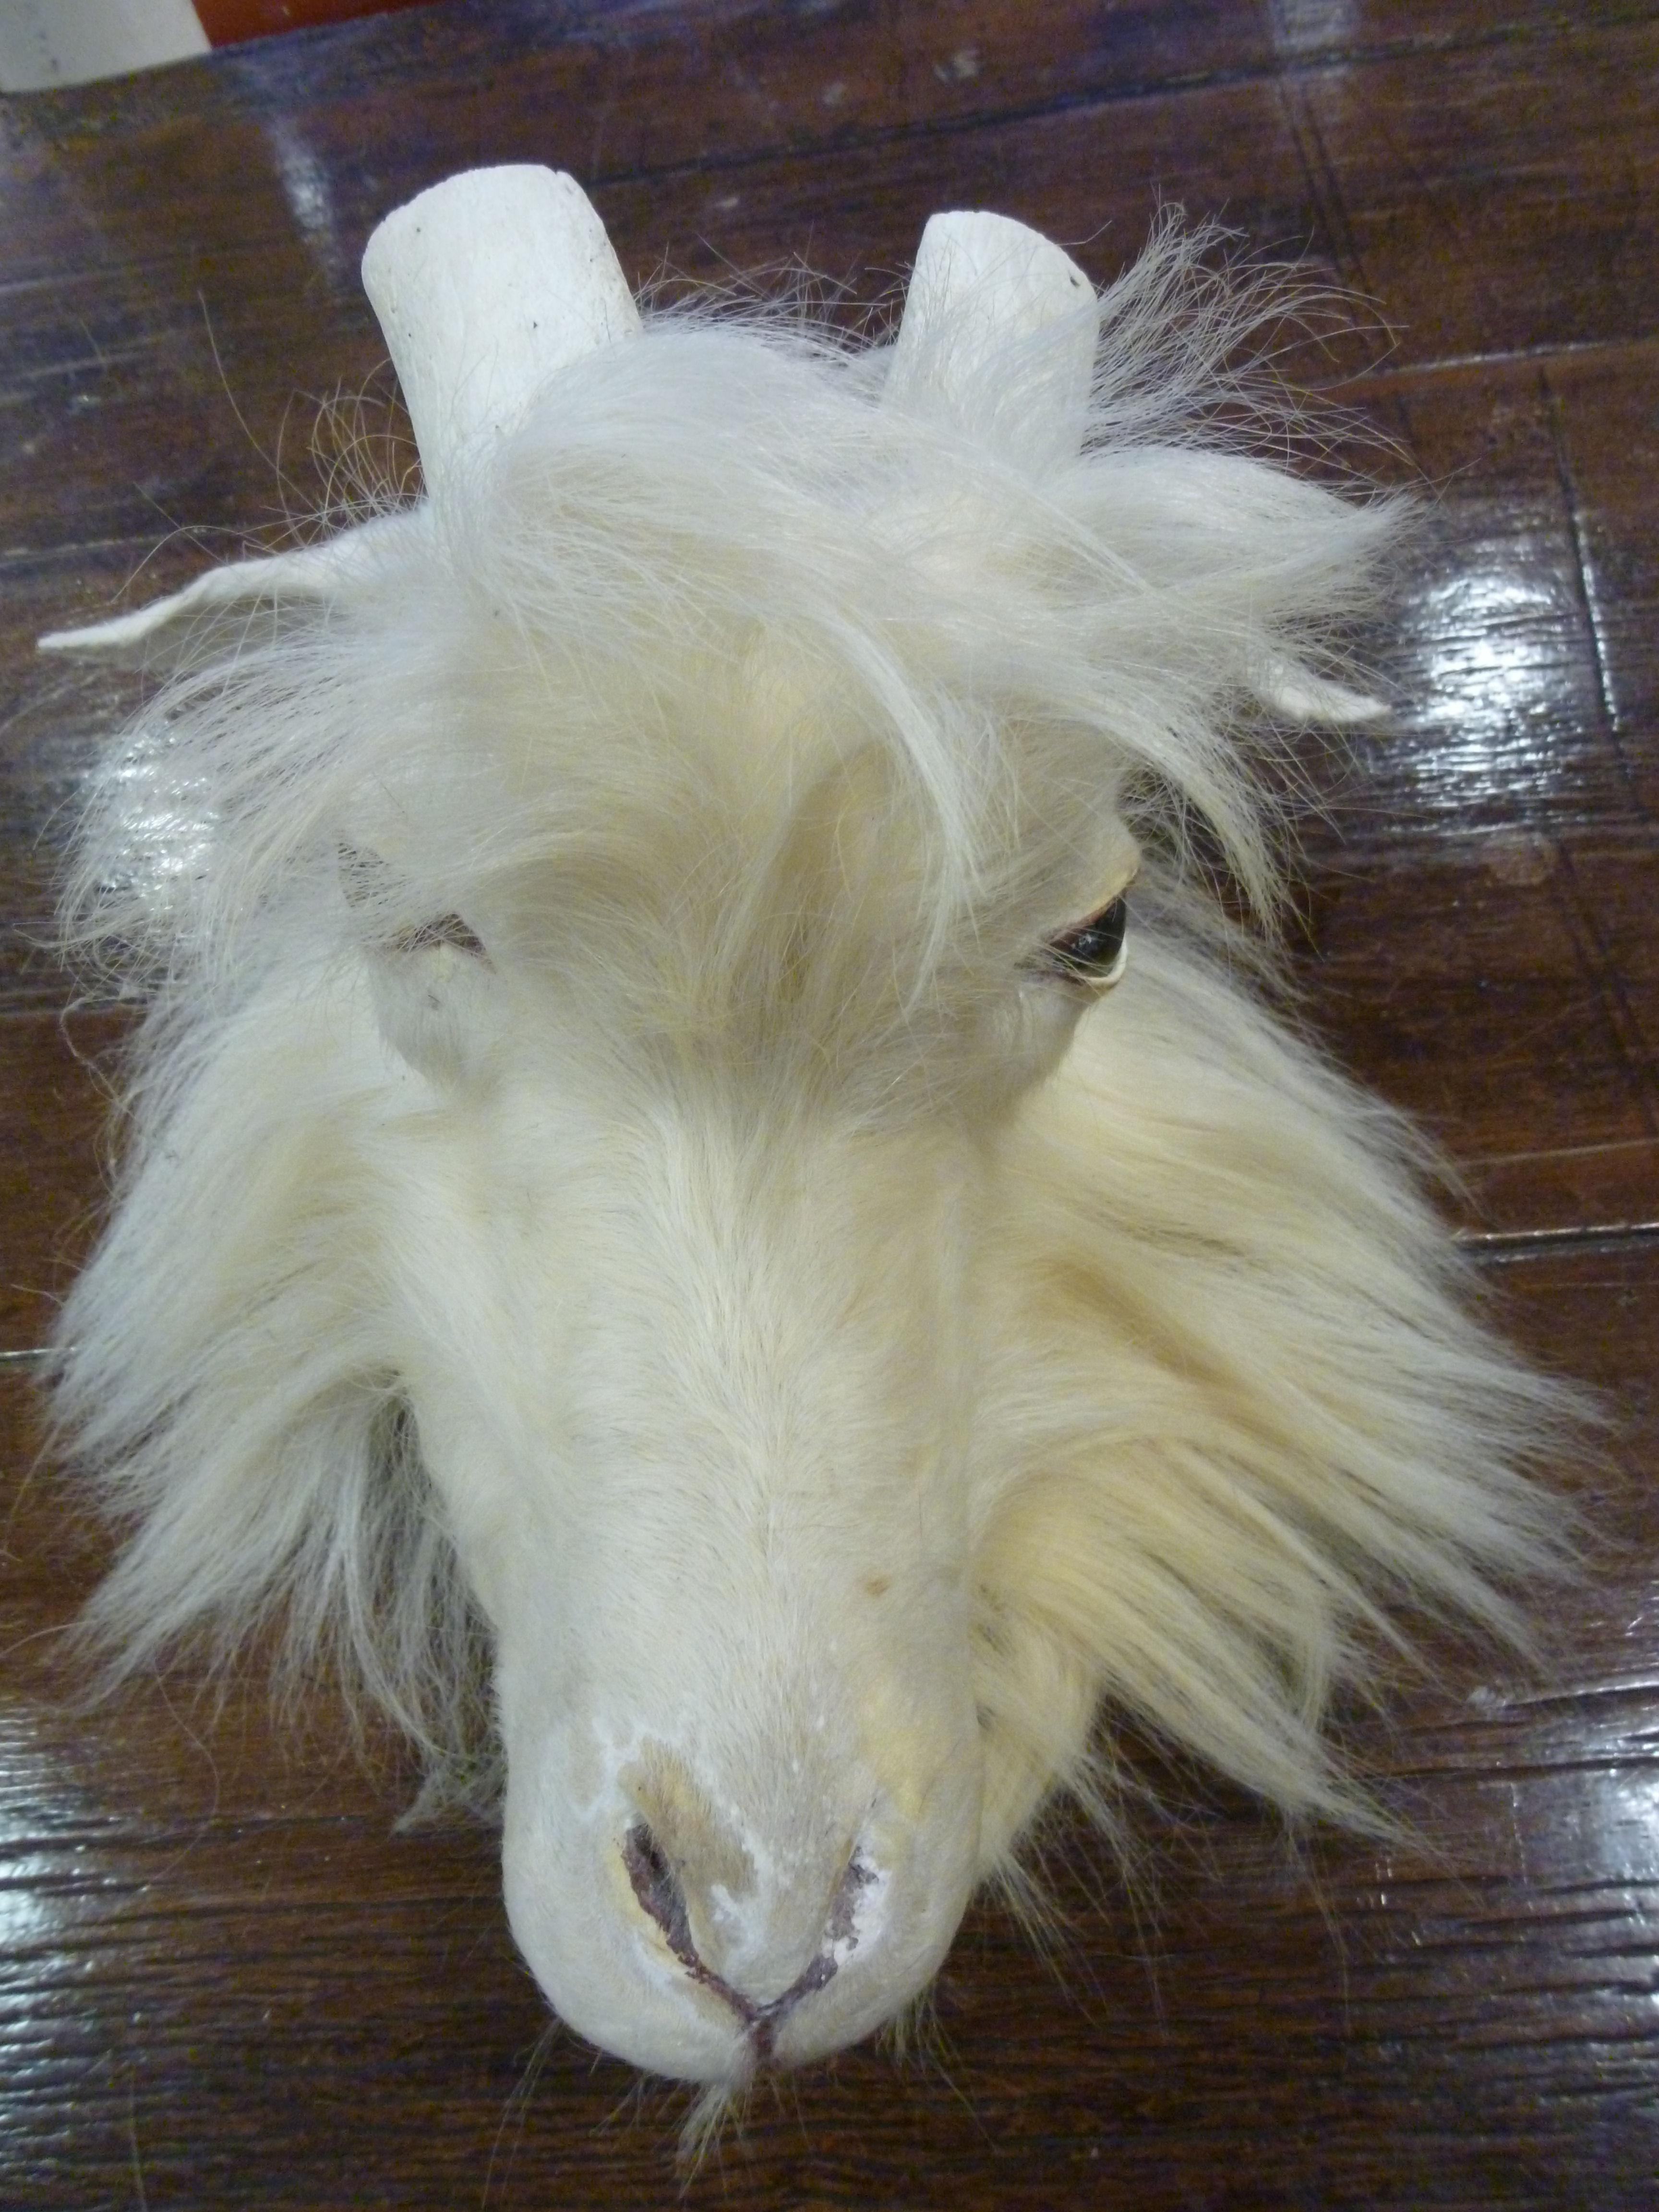 A white goat with cut-off horns, head mo